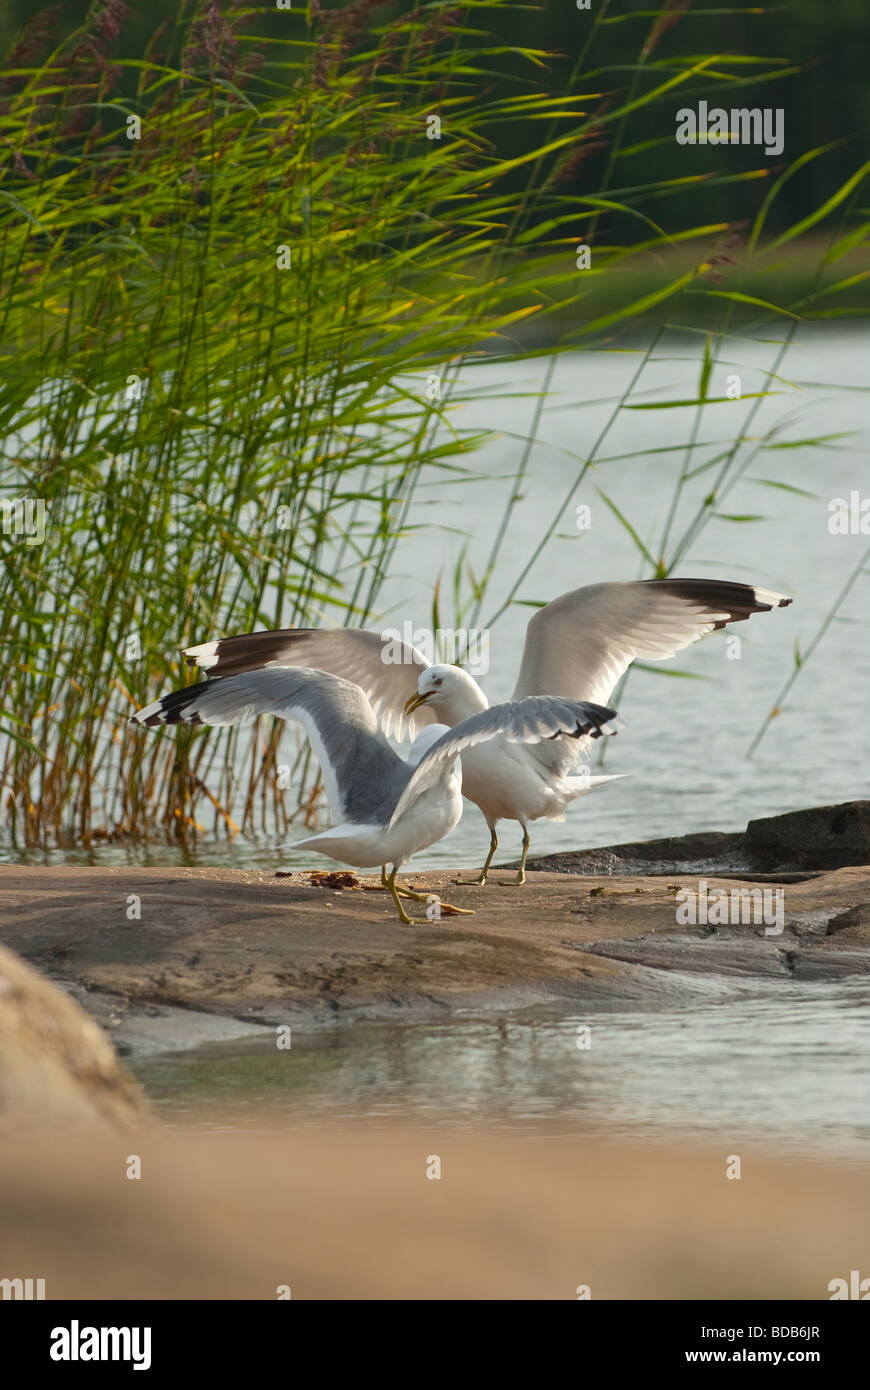 Seagulls fighting over food on the rocks of a small shore Stock Photo